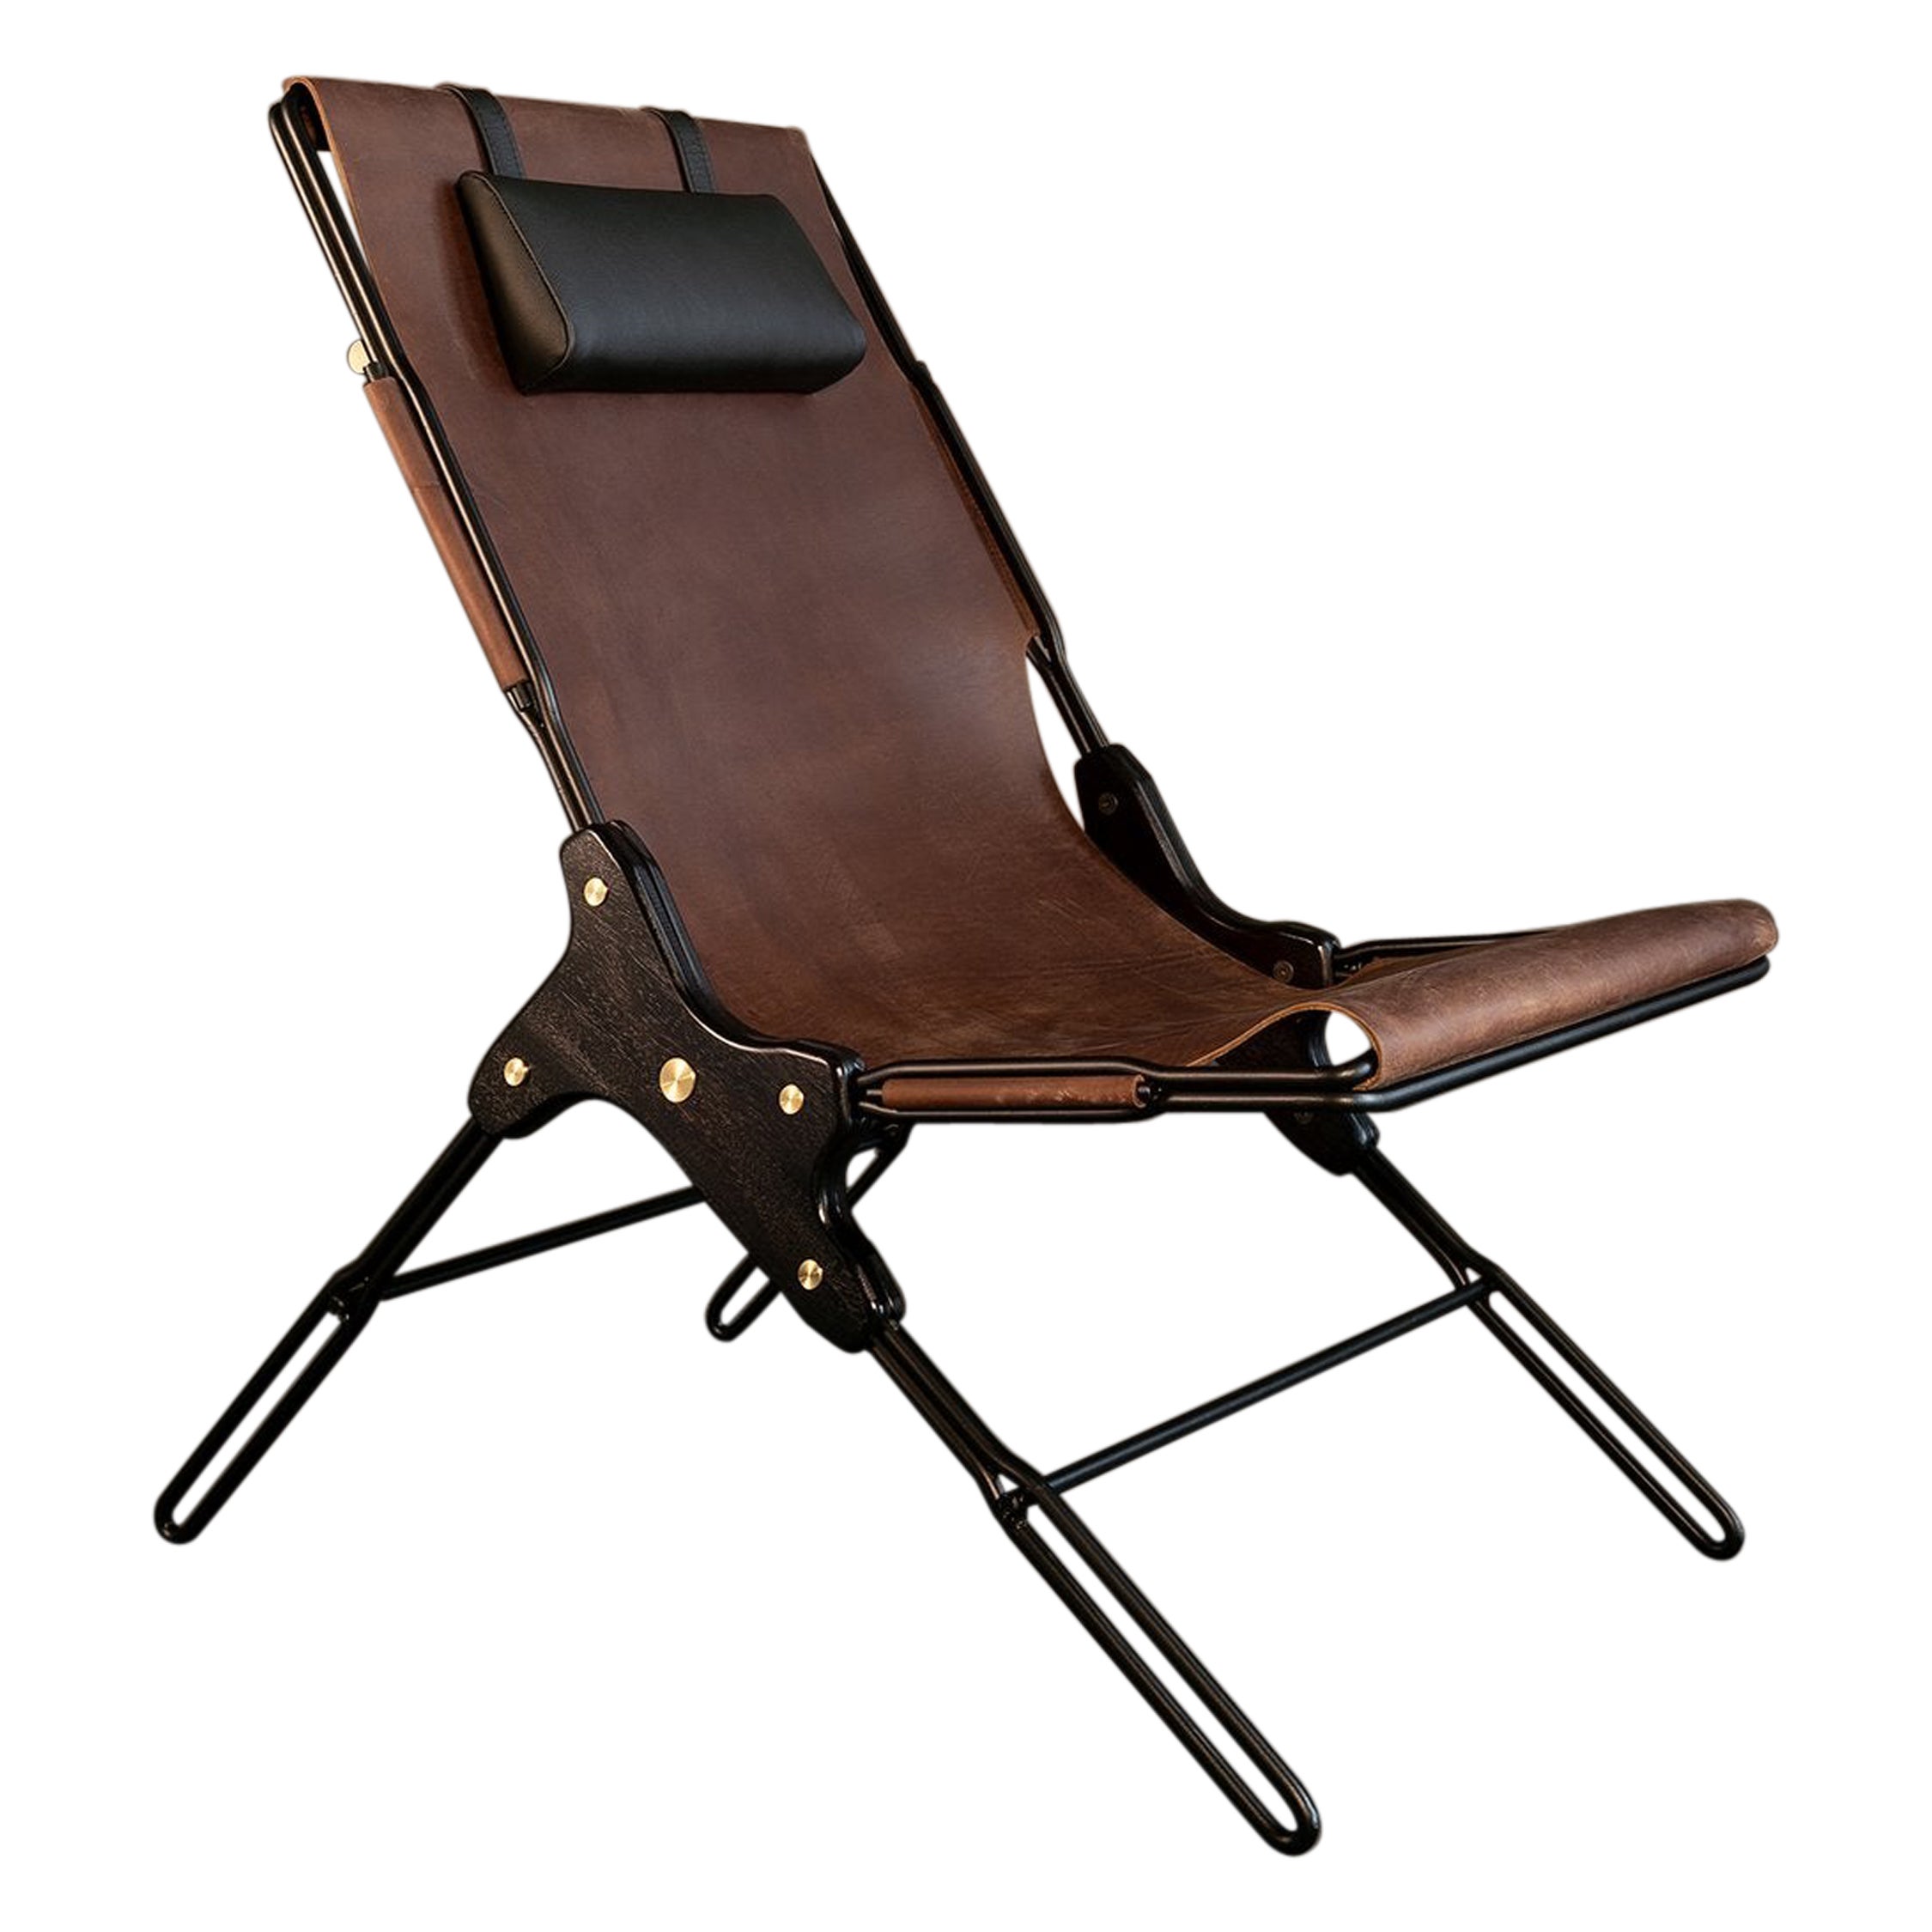 Perfidia_01 Lounge Chair Brown by ANDEAN, REP by Tuleste Factory For Sale